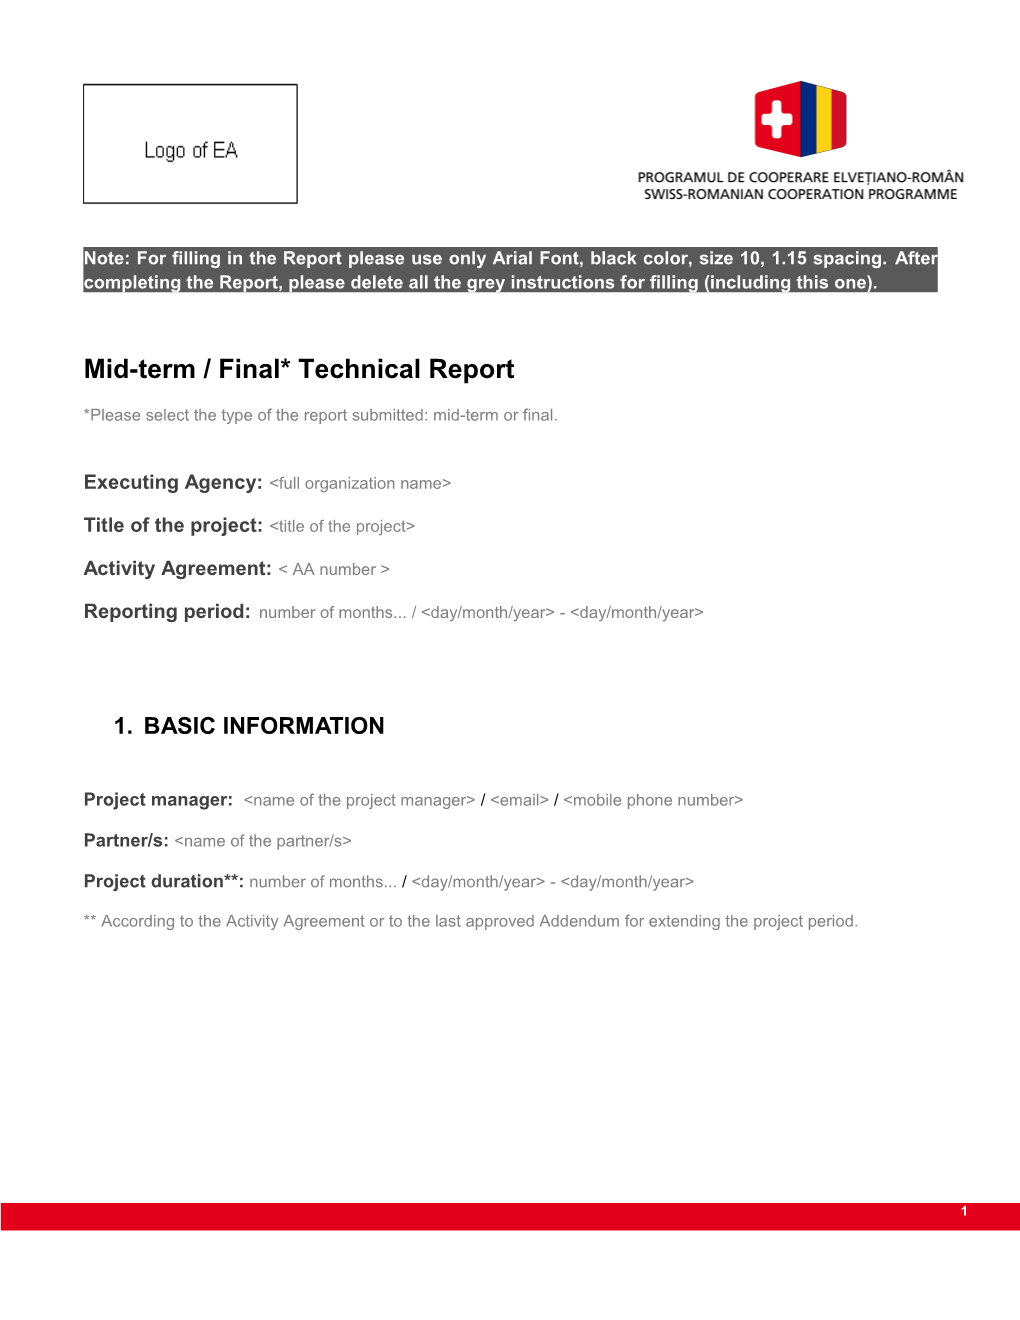 Mid-Term / Final*Technical Report